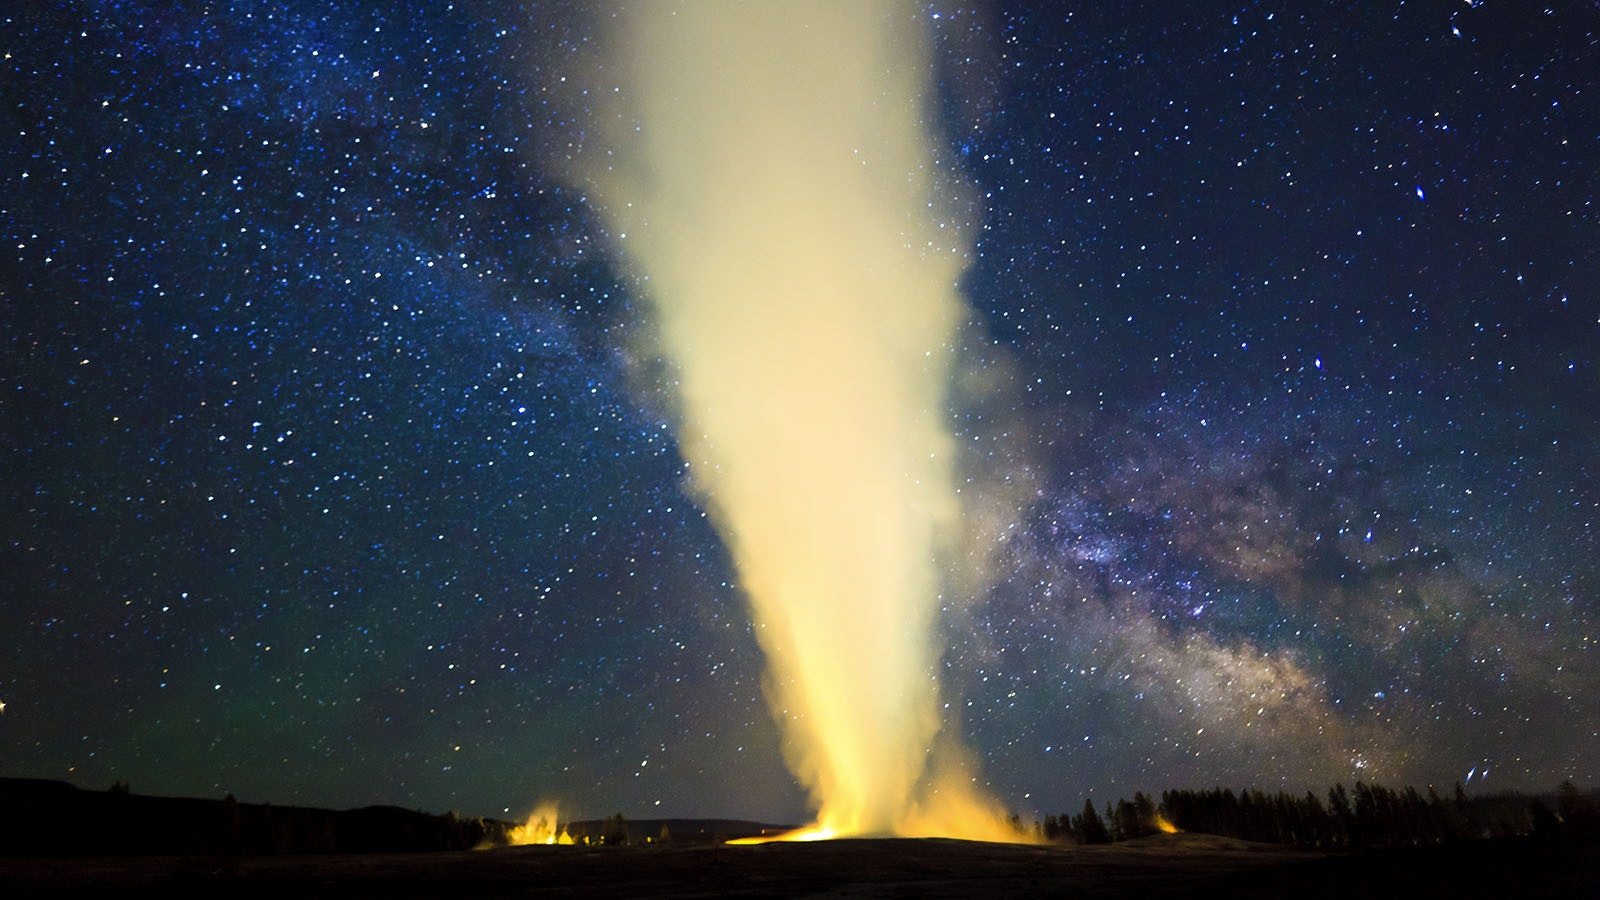 The Milky Way Galaxy as seen in the pristine night skies over Wyoming. Old Faithful blows under a clear sky and a view of the Milky Way.